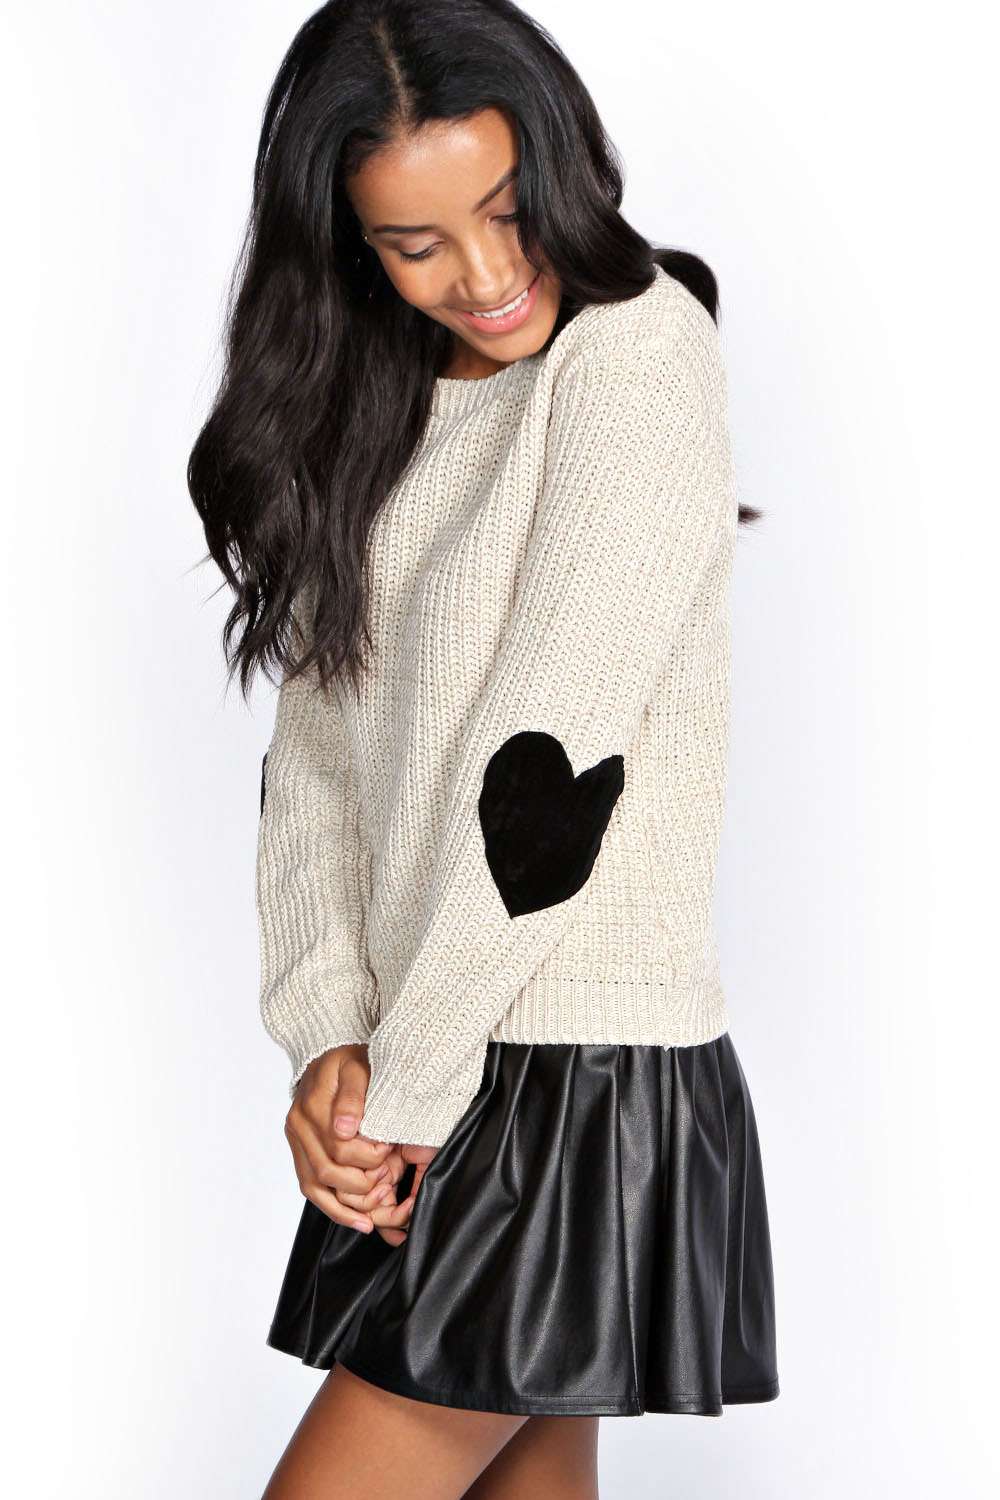 boohoo Tracy Harper Heart Elbow Patch Jumper -